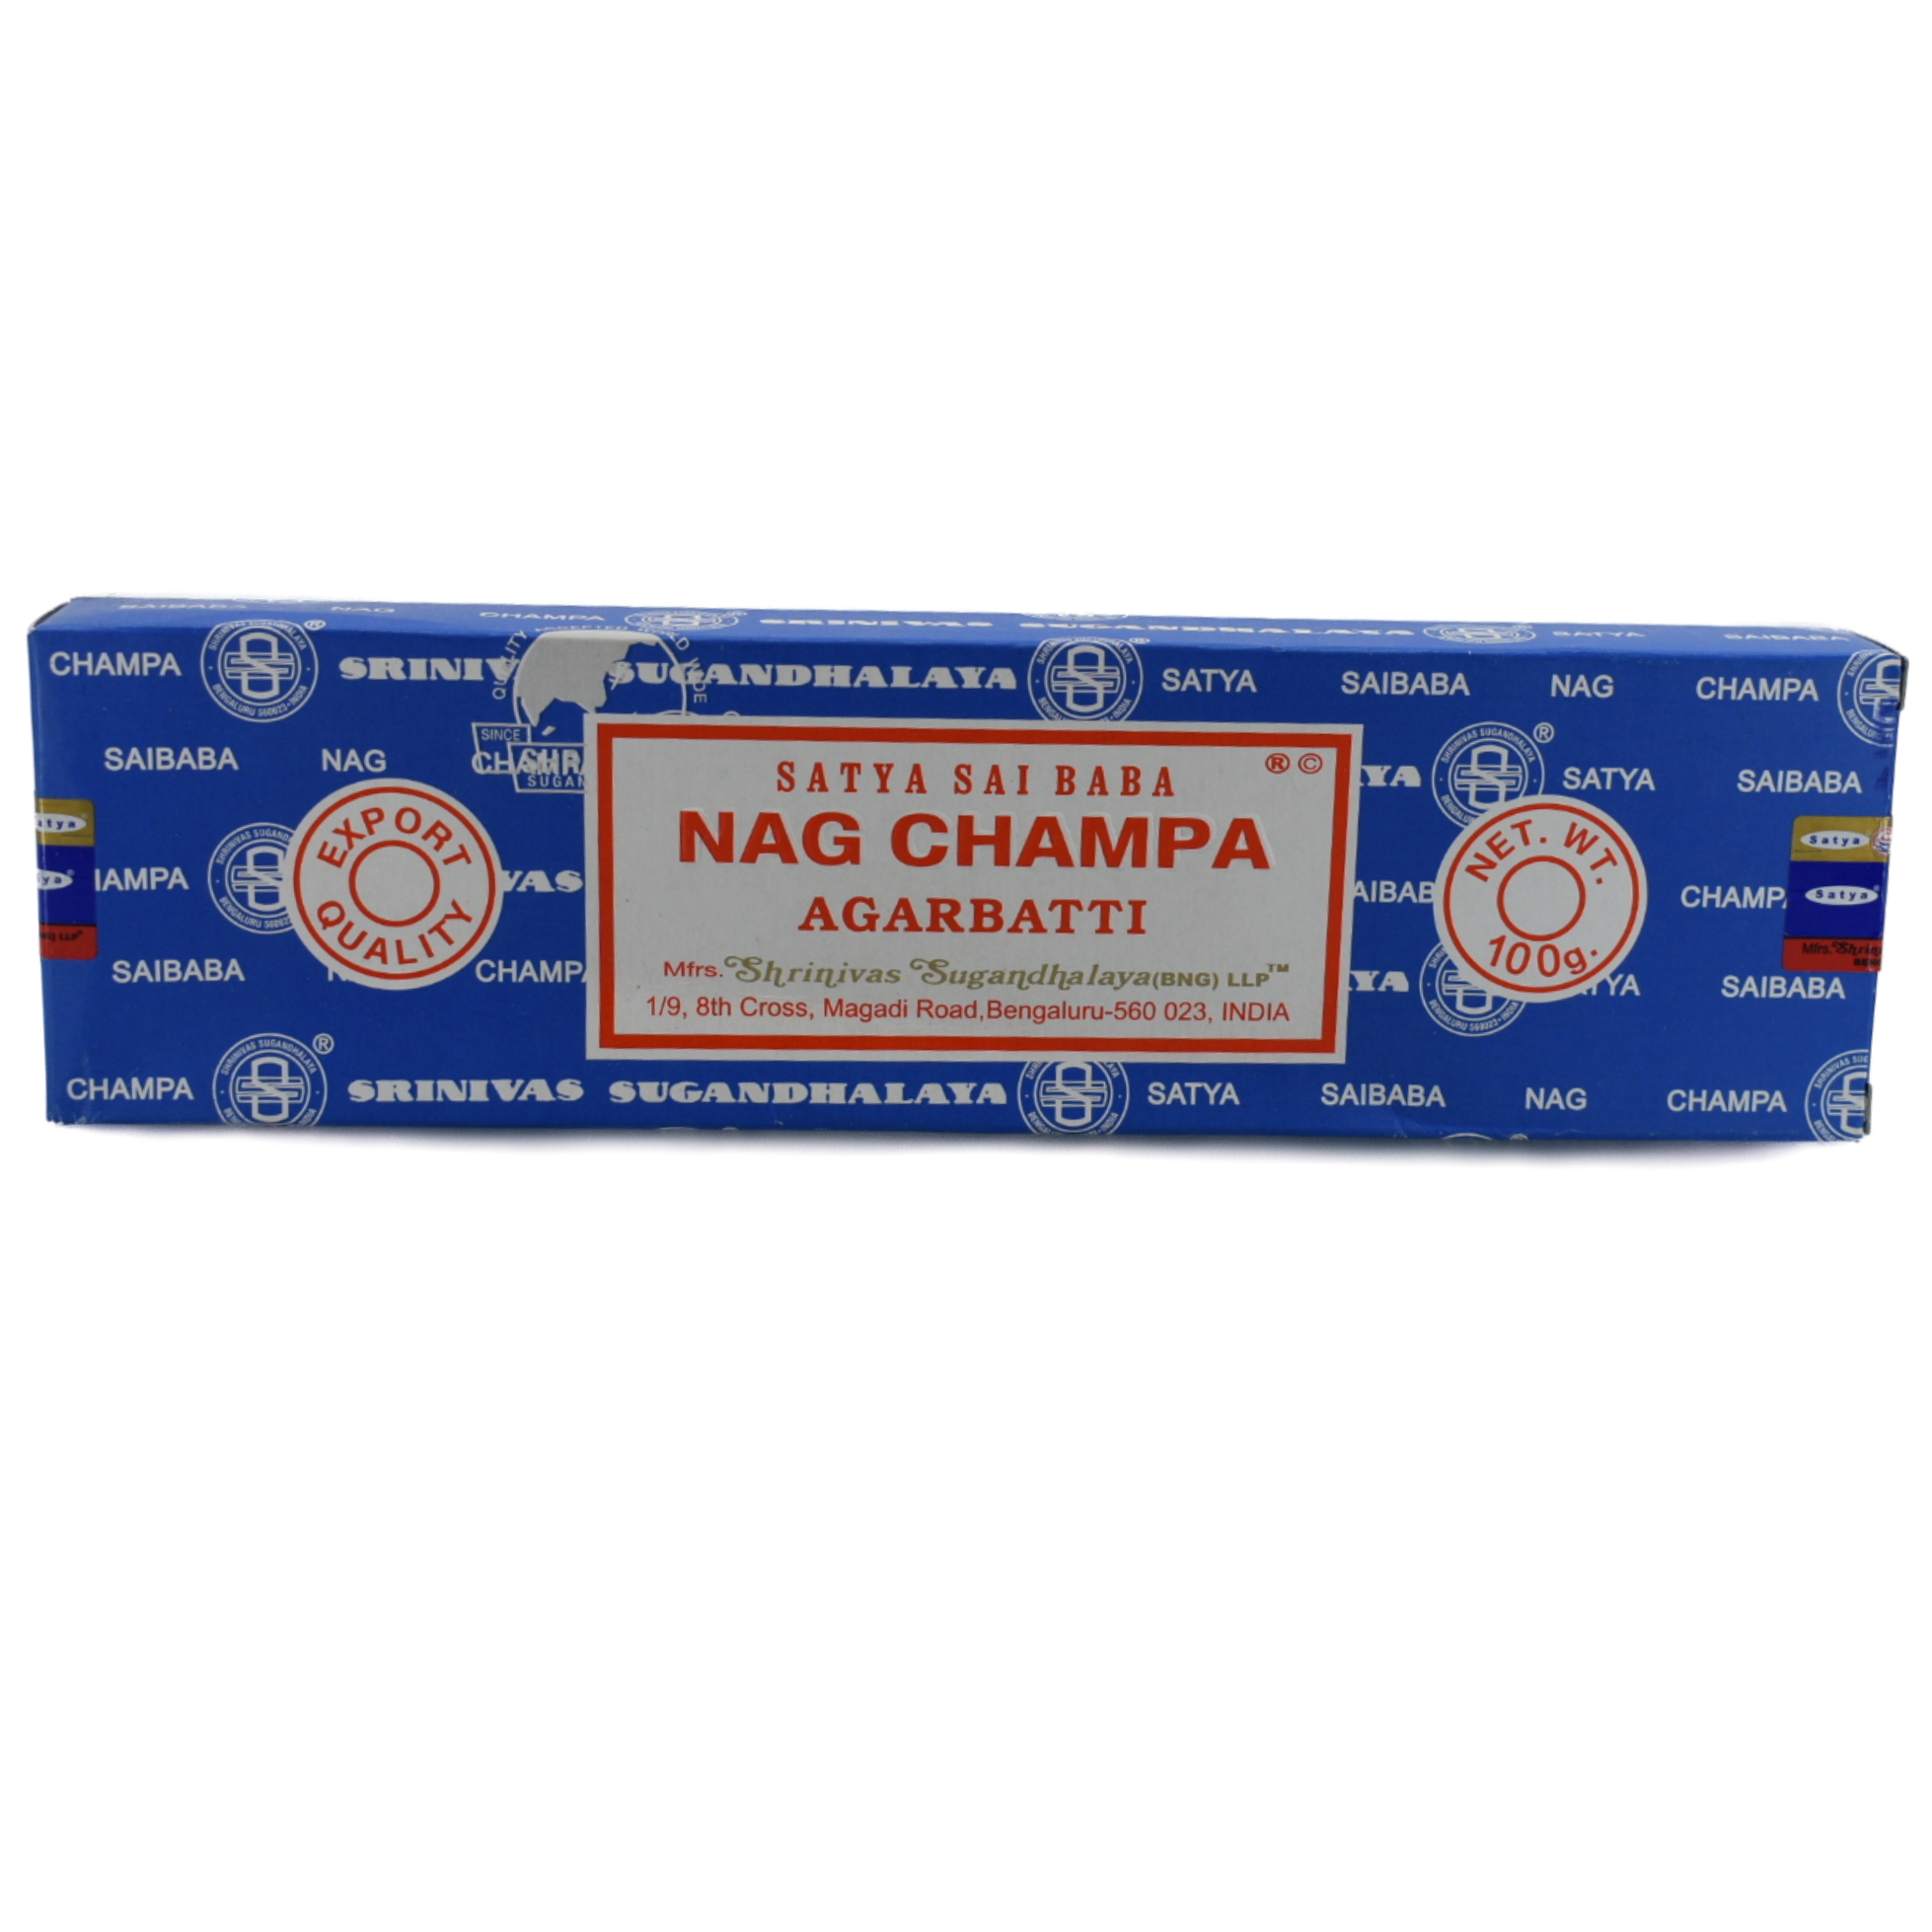 Nag Champa 100gr Incense Sticks.  A dark blue box with a white rectangle in the middle. The red lettering and frame just inside the border. The lettering has the company name and title; Satya Sai Baba, Nag Champa, Agarbatti. Below the title is the manufacturer's information listed. In the lower right corner of the rectangle is the certified green product emblem. There are two circles, one on each side of the rectangle. The left circle says Export Quality and the right circle says Net Weight 100 grams.